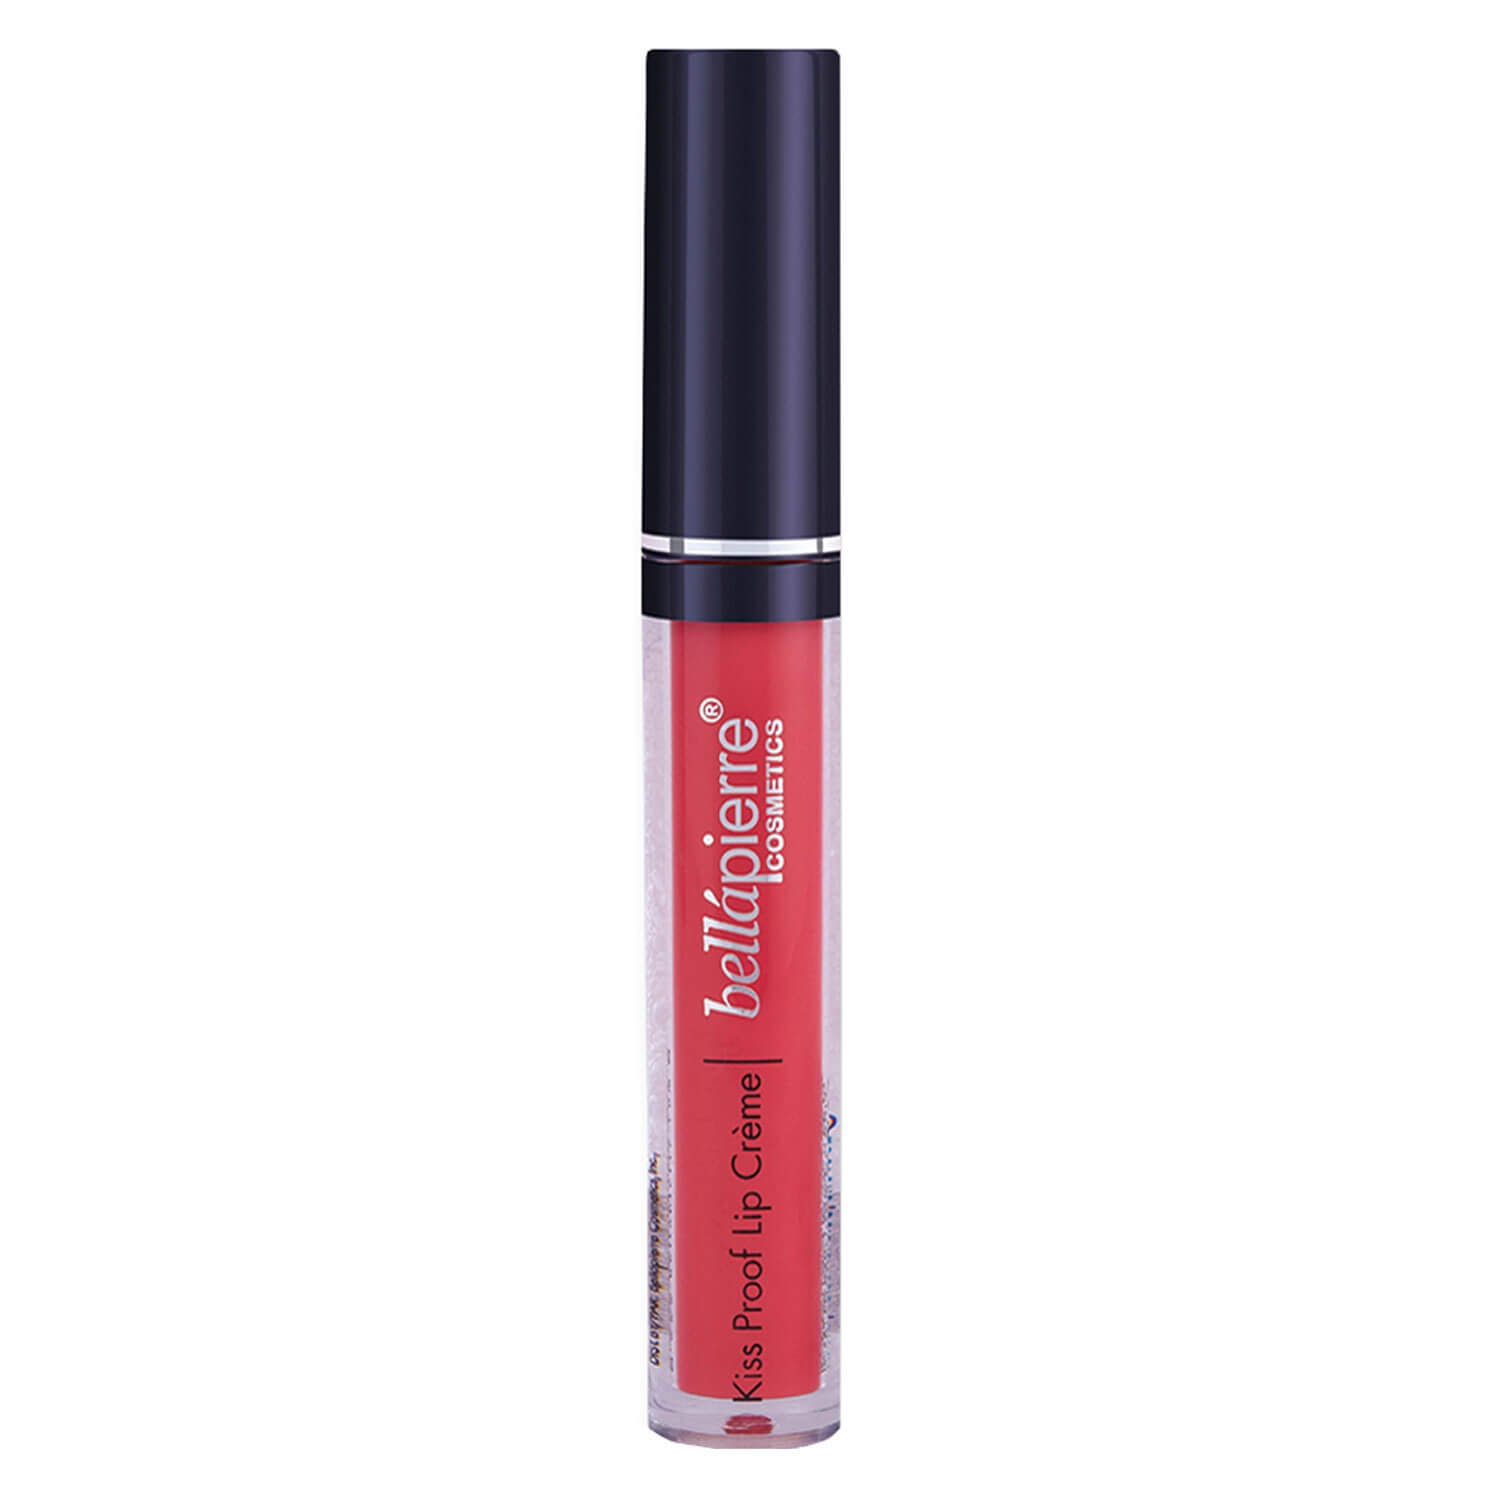 Product image from bellapierre Lips - Kiss Proof Lip Crème Aloha